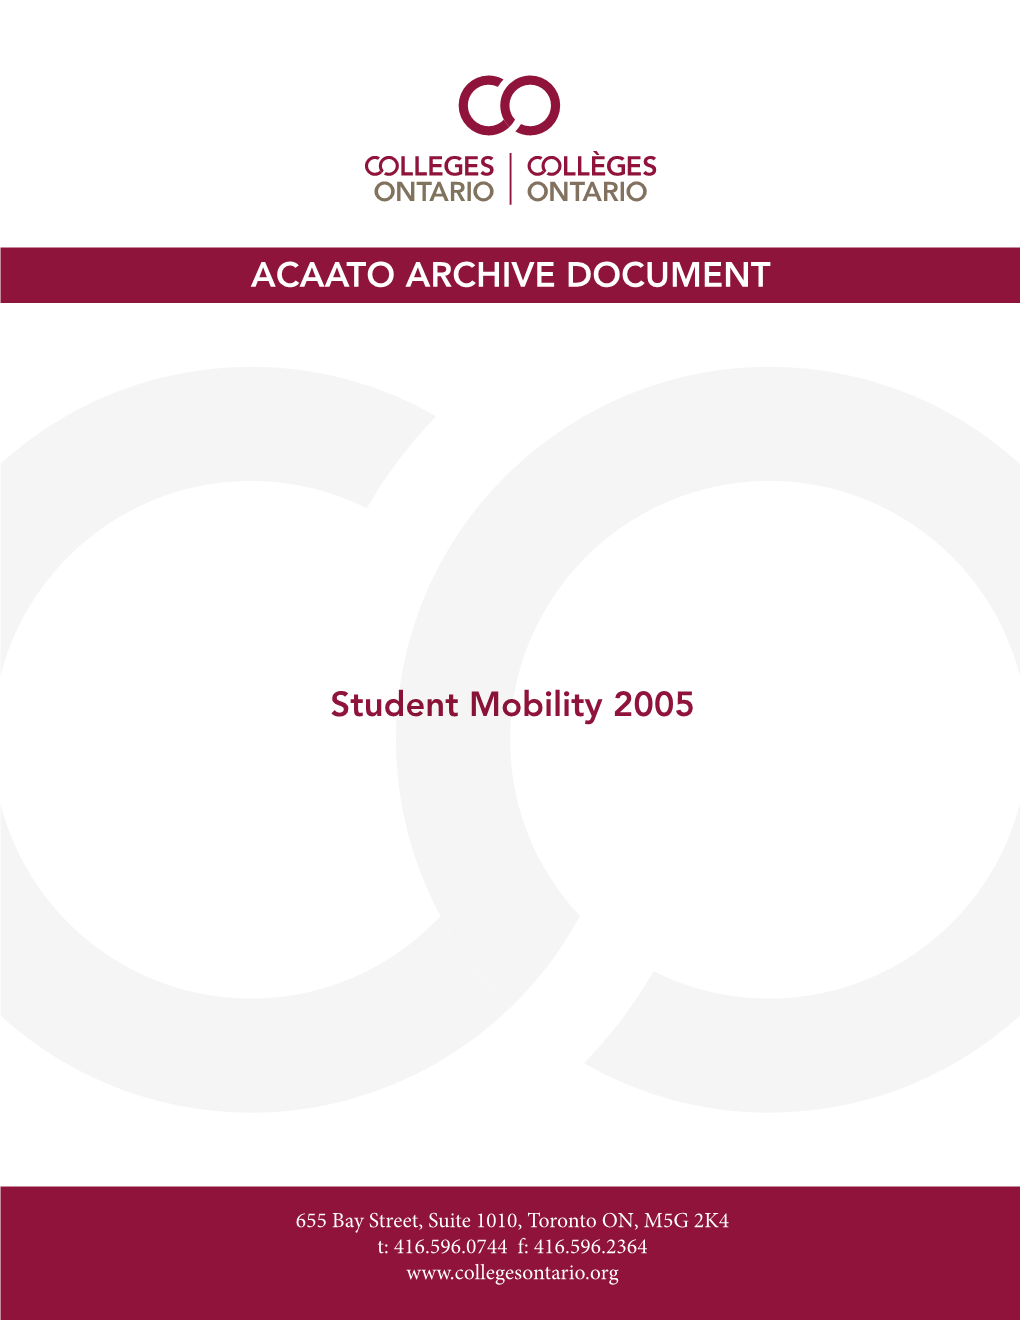 ACAATO ARCHIVE DOCUMENT Student Mobility 2005